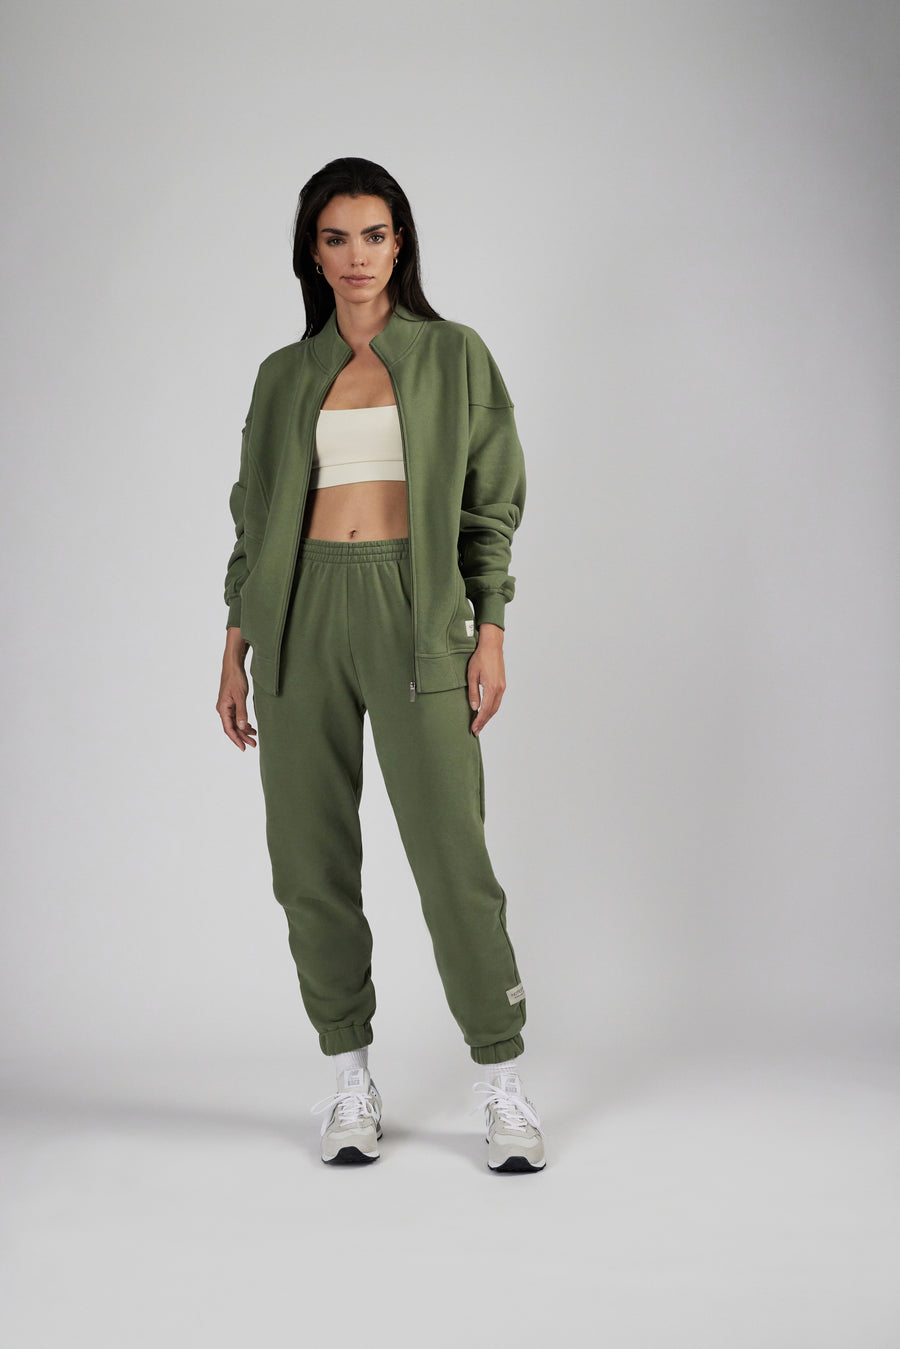 Woman wearing an oversized zipper sweat jacket and sweatpants in color sage green